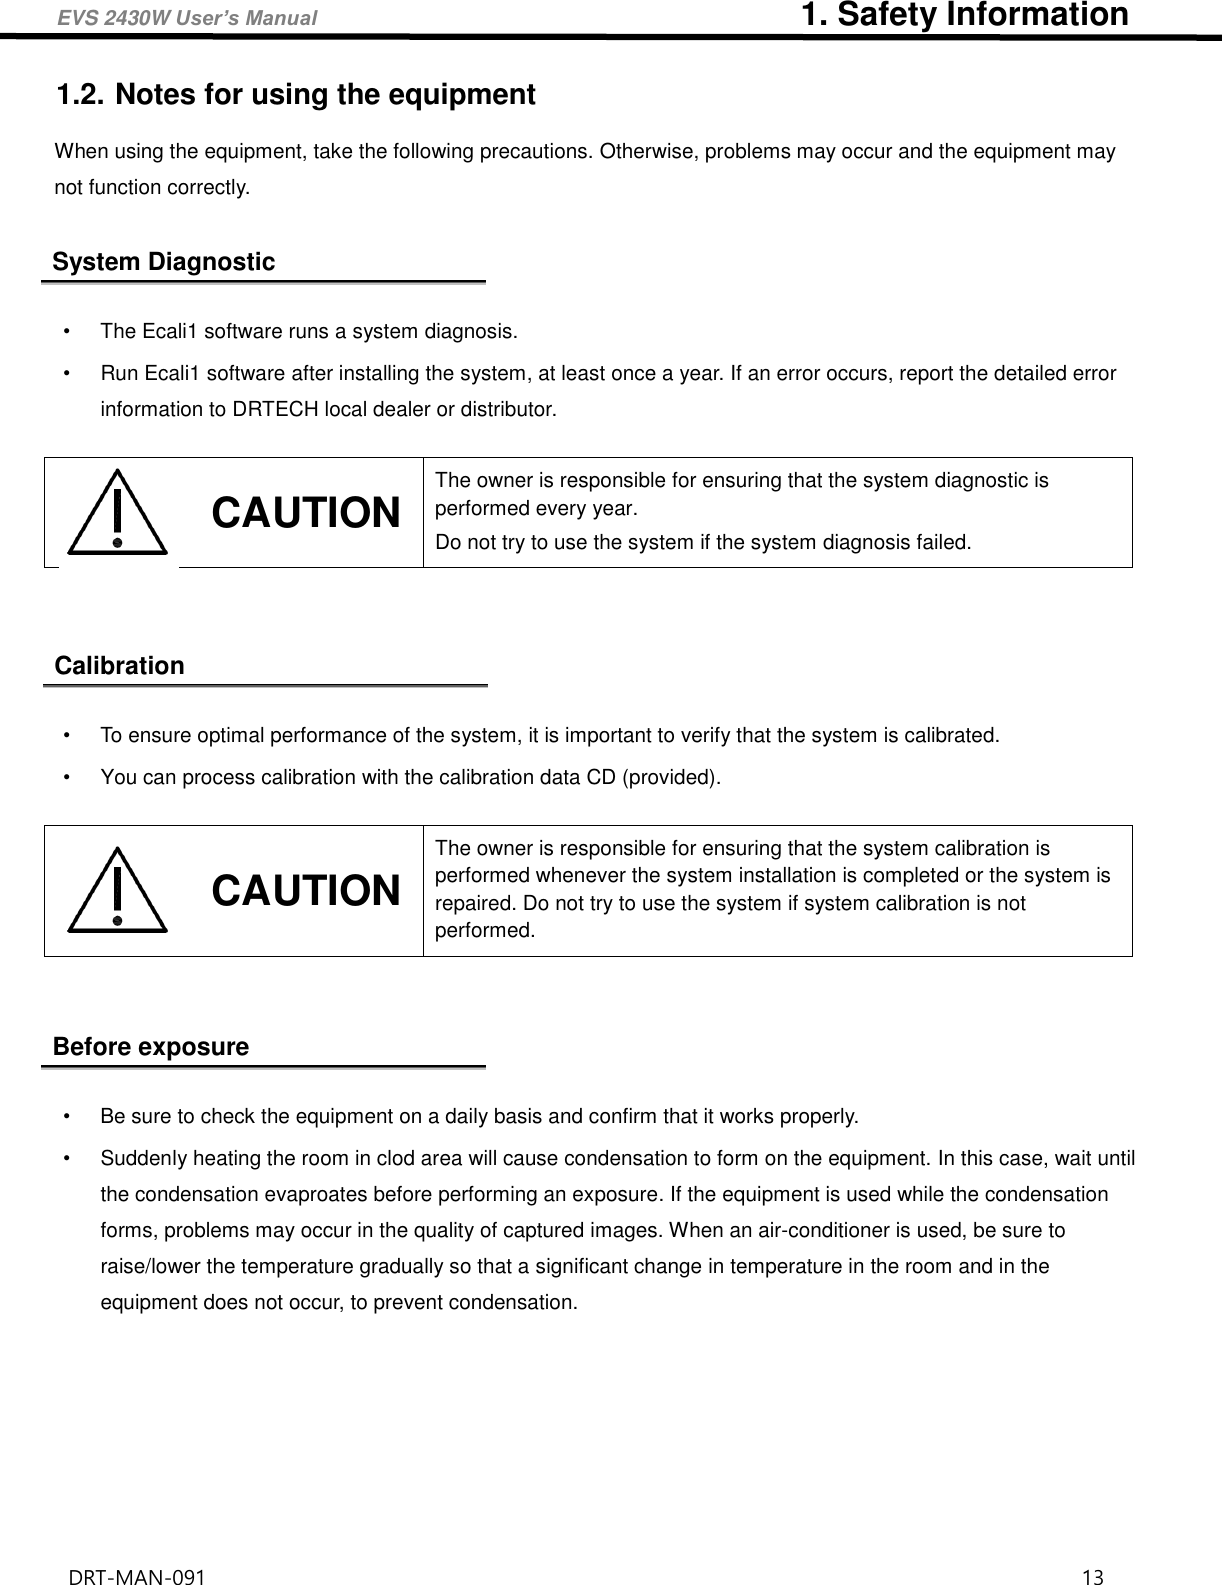 EVS 2430W User’s Manual                             1. Safety Information DRT-MAN-091                                                                                    13   1.2. Notes for using the equipment When using the equipment, take the following precautions. Otherwise, problems may occur and the equipment may not function correctly.  System Diagnostic  •  The Ecali1 software runs a system diagnosis. •  Run Ecali1 software after installing the system, at least once a year. If an error occurs, report the detailed error information to DRTECH local dealer or distributor.     Calibration  •  To ensure optimal performance of the system, it is important to verify that the system is calibrated. •  You can process calibration with the calibration data CD (provided).       Before exposure  •  Be sure to check the equipment on a daily basis and confirm that it works properly. •  Suddenly heating the room in clod area will cause condensation to form on the equipment. In this case, wait until the condensation evaproates before performing an exposure. If the equipment is used while the condensation forms, problems may occur in the quality of captured images. When an air-conditioner is used, be sure to raise/lower the temperature gradually so that a significant change in temperature in the room and in the equipment does not occur, to prevent condensation.      CAUTION The owner is responsible for ensuring that the system diagnostic is performed every year.   Do not try to use the system if the system diagnosis failed.    CAUTION The owner is responsible for ensuring that the system calibration is performed whenever the system installation is completed or the system is repaired. Do not try to use the system if system calibration is not performed.   